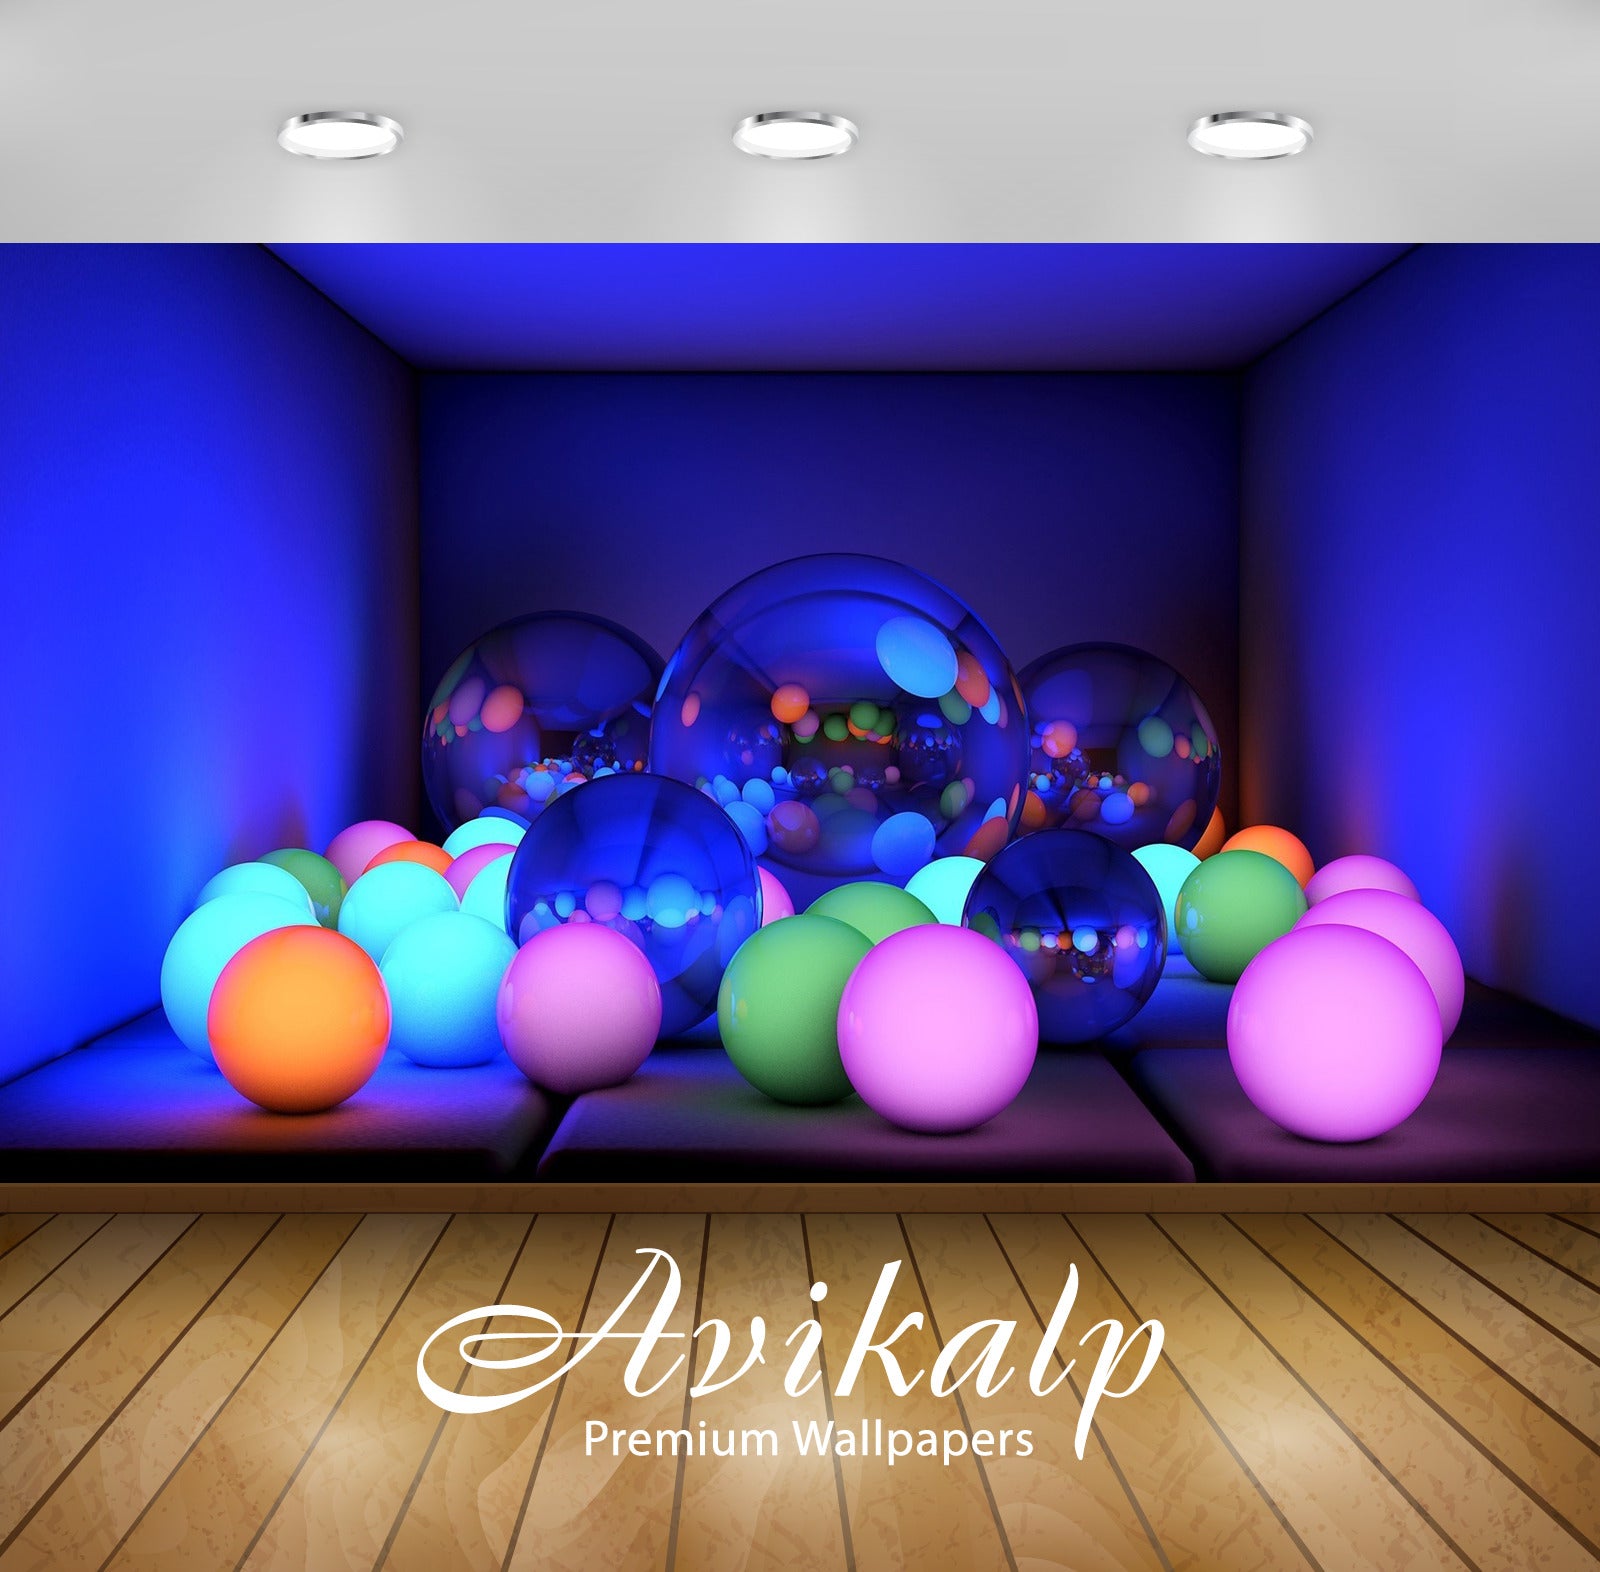 Avikalp Exclusive Awi3969 Spheres Reflecting Each Other Full HD Wallpapers for Living room, Hall, Ki